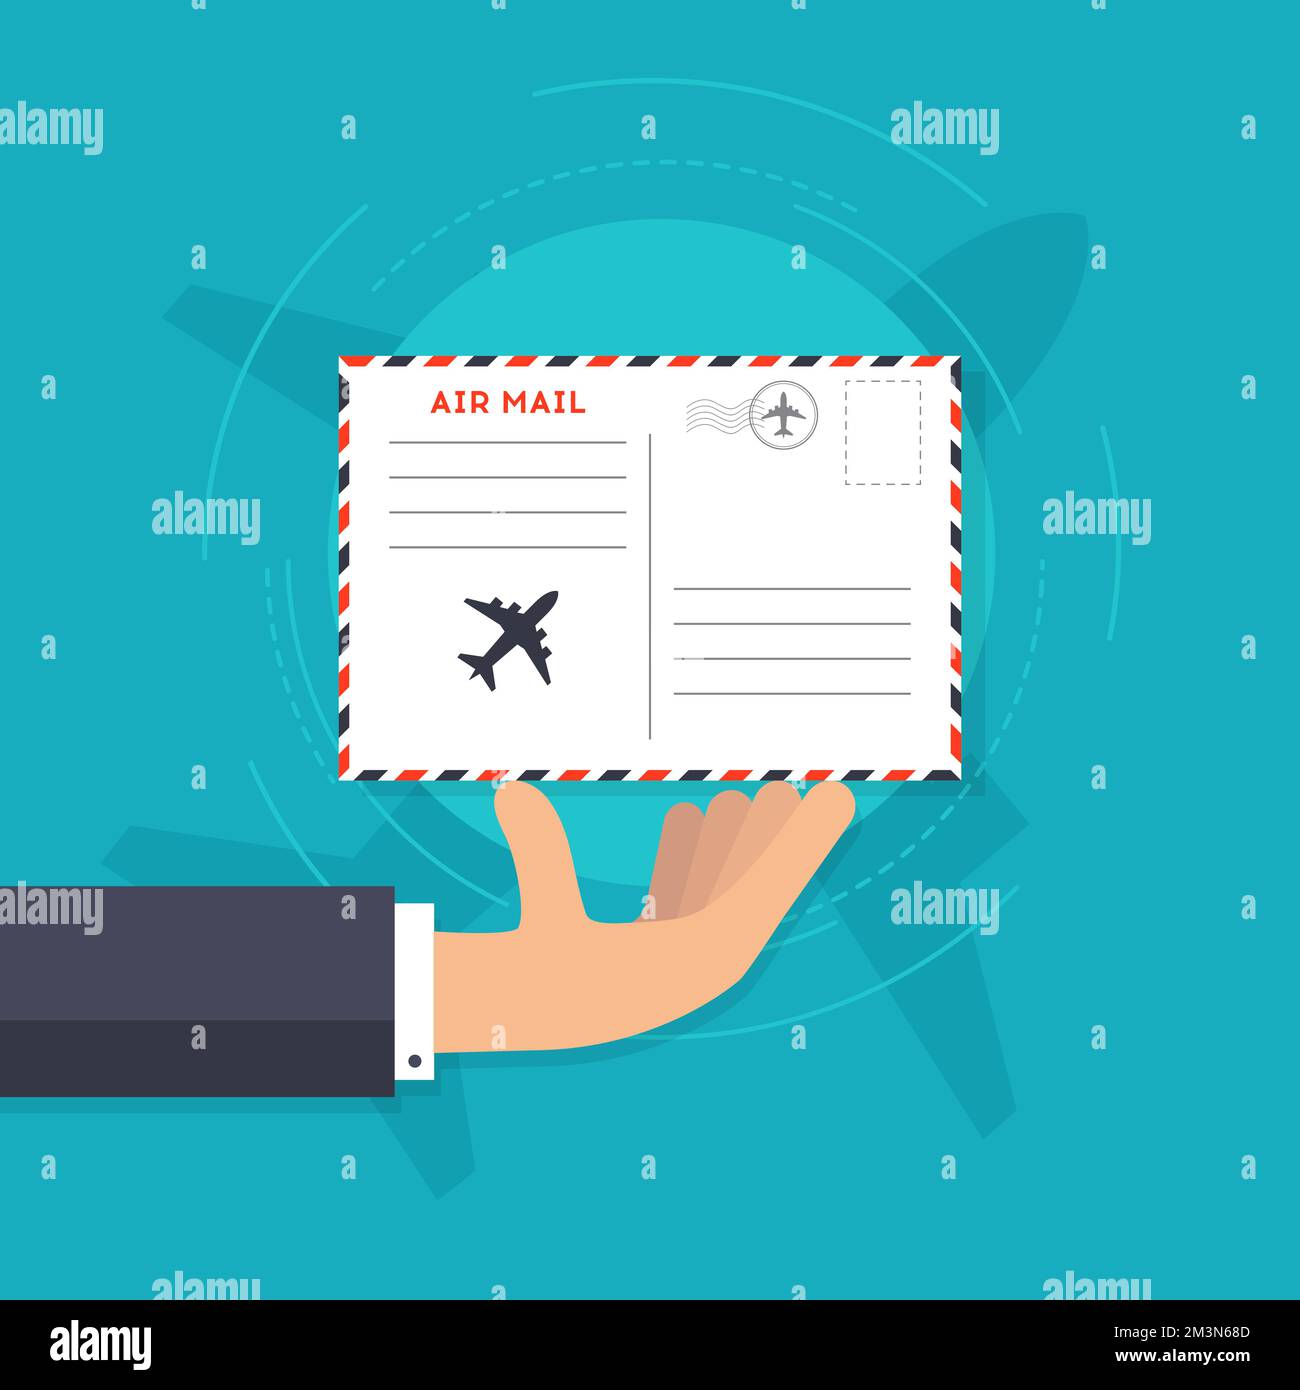 Airmail vector illustration. Hand holding an envelope with postal stamp. Air mail delivery flat icon. Vector illustration Stock Vector